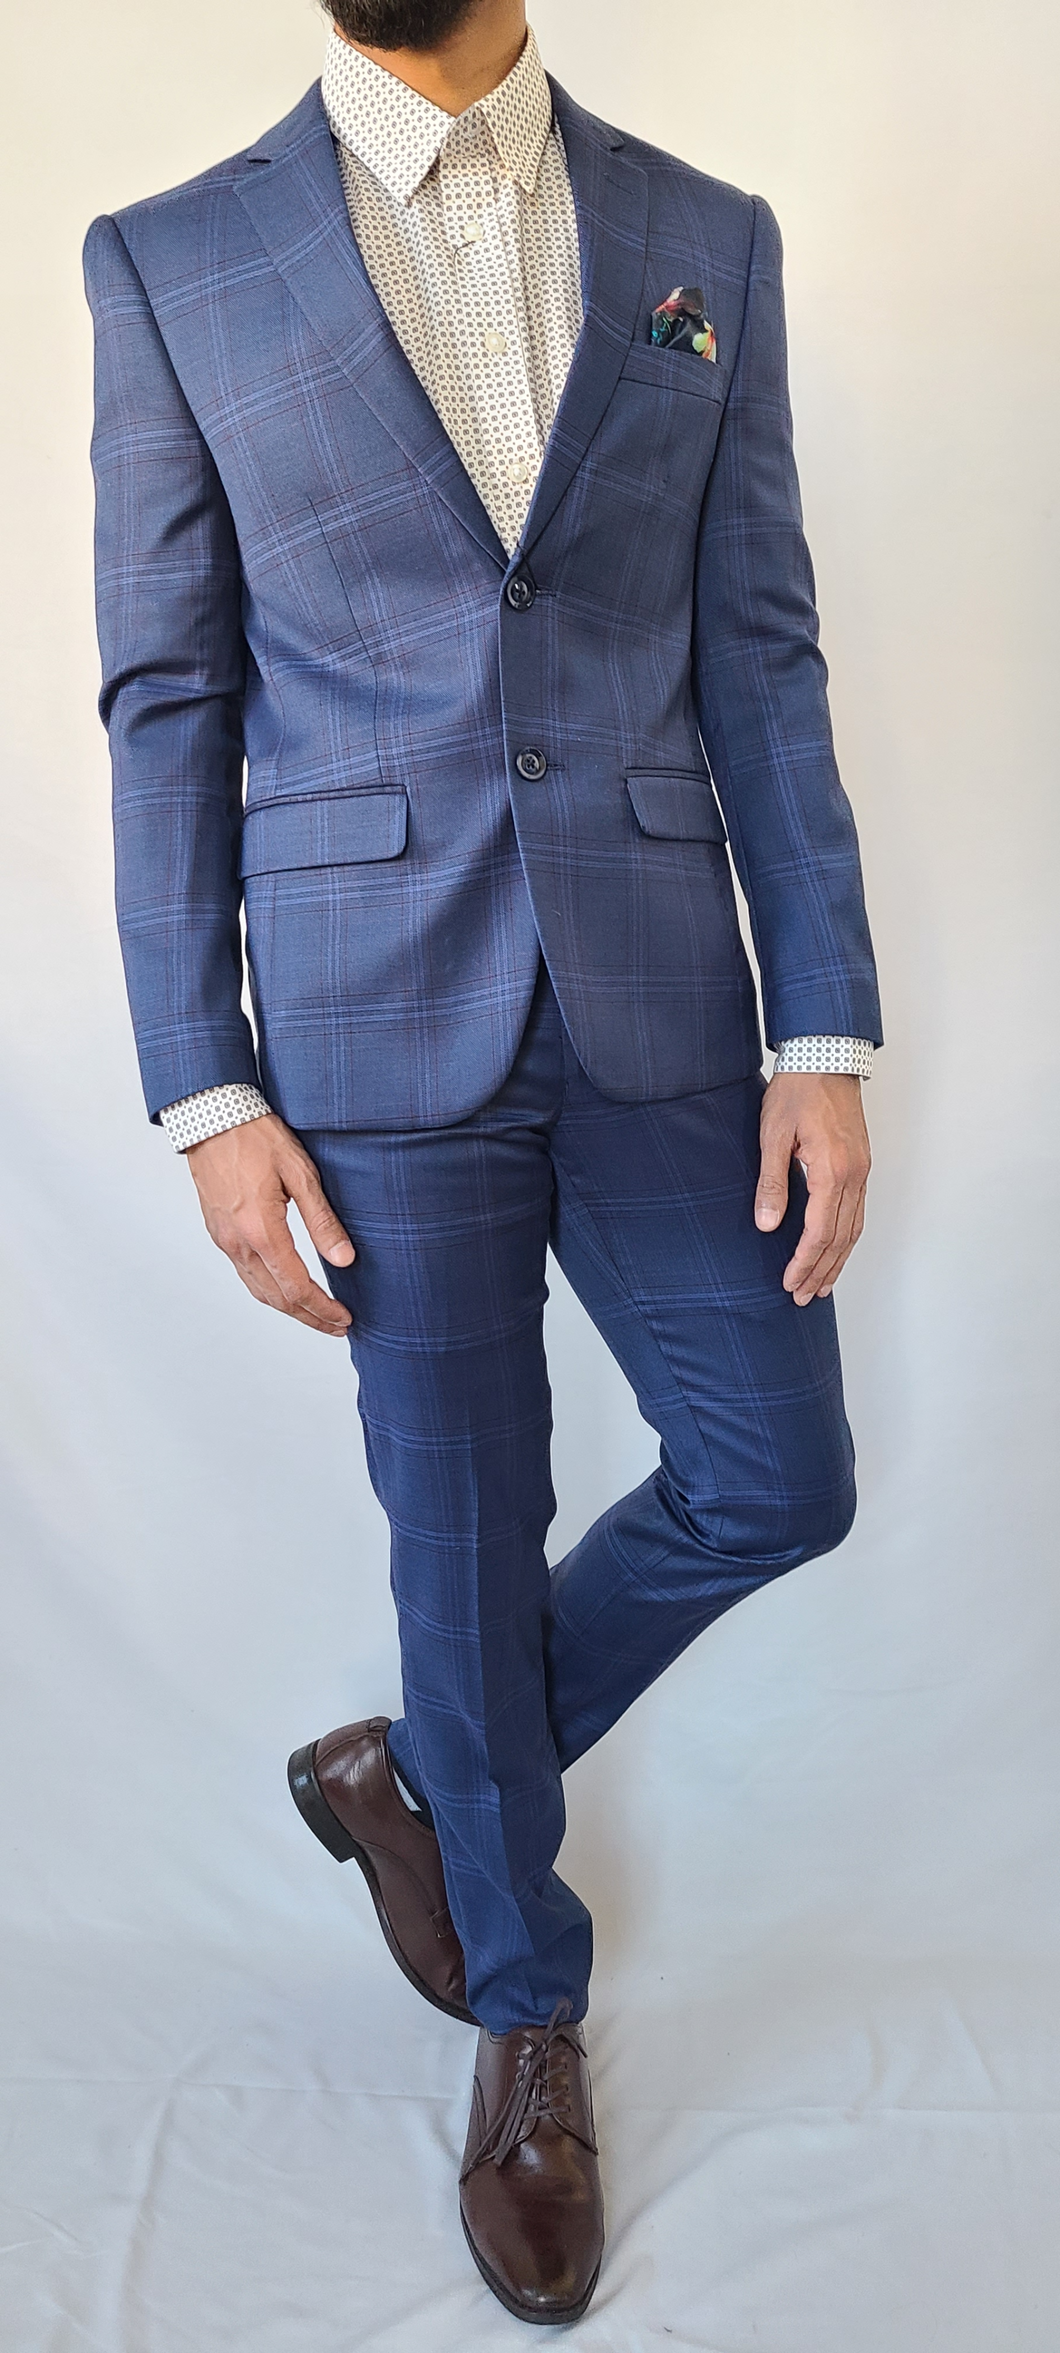 Slim Fit Blue Checkered Suit - Tall